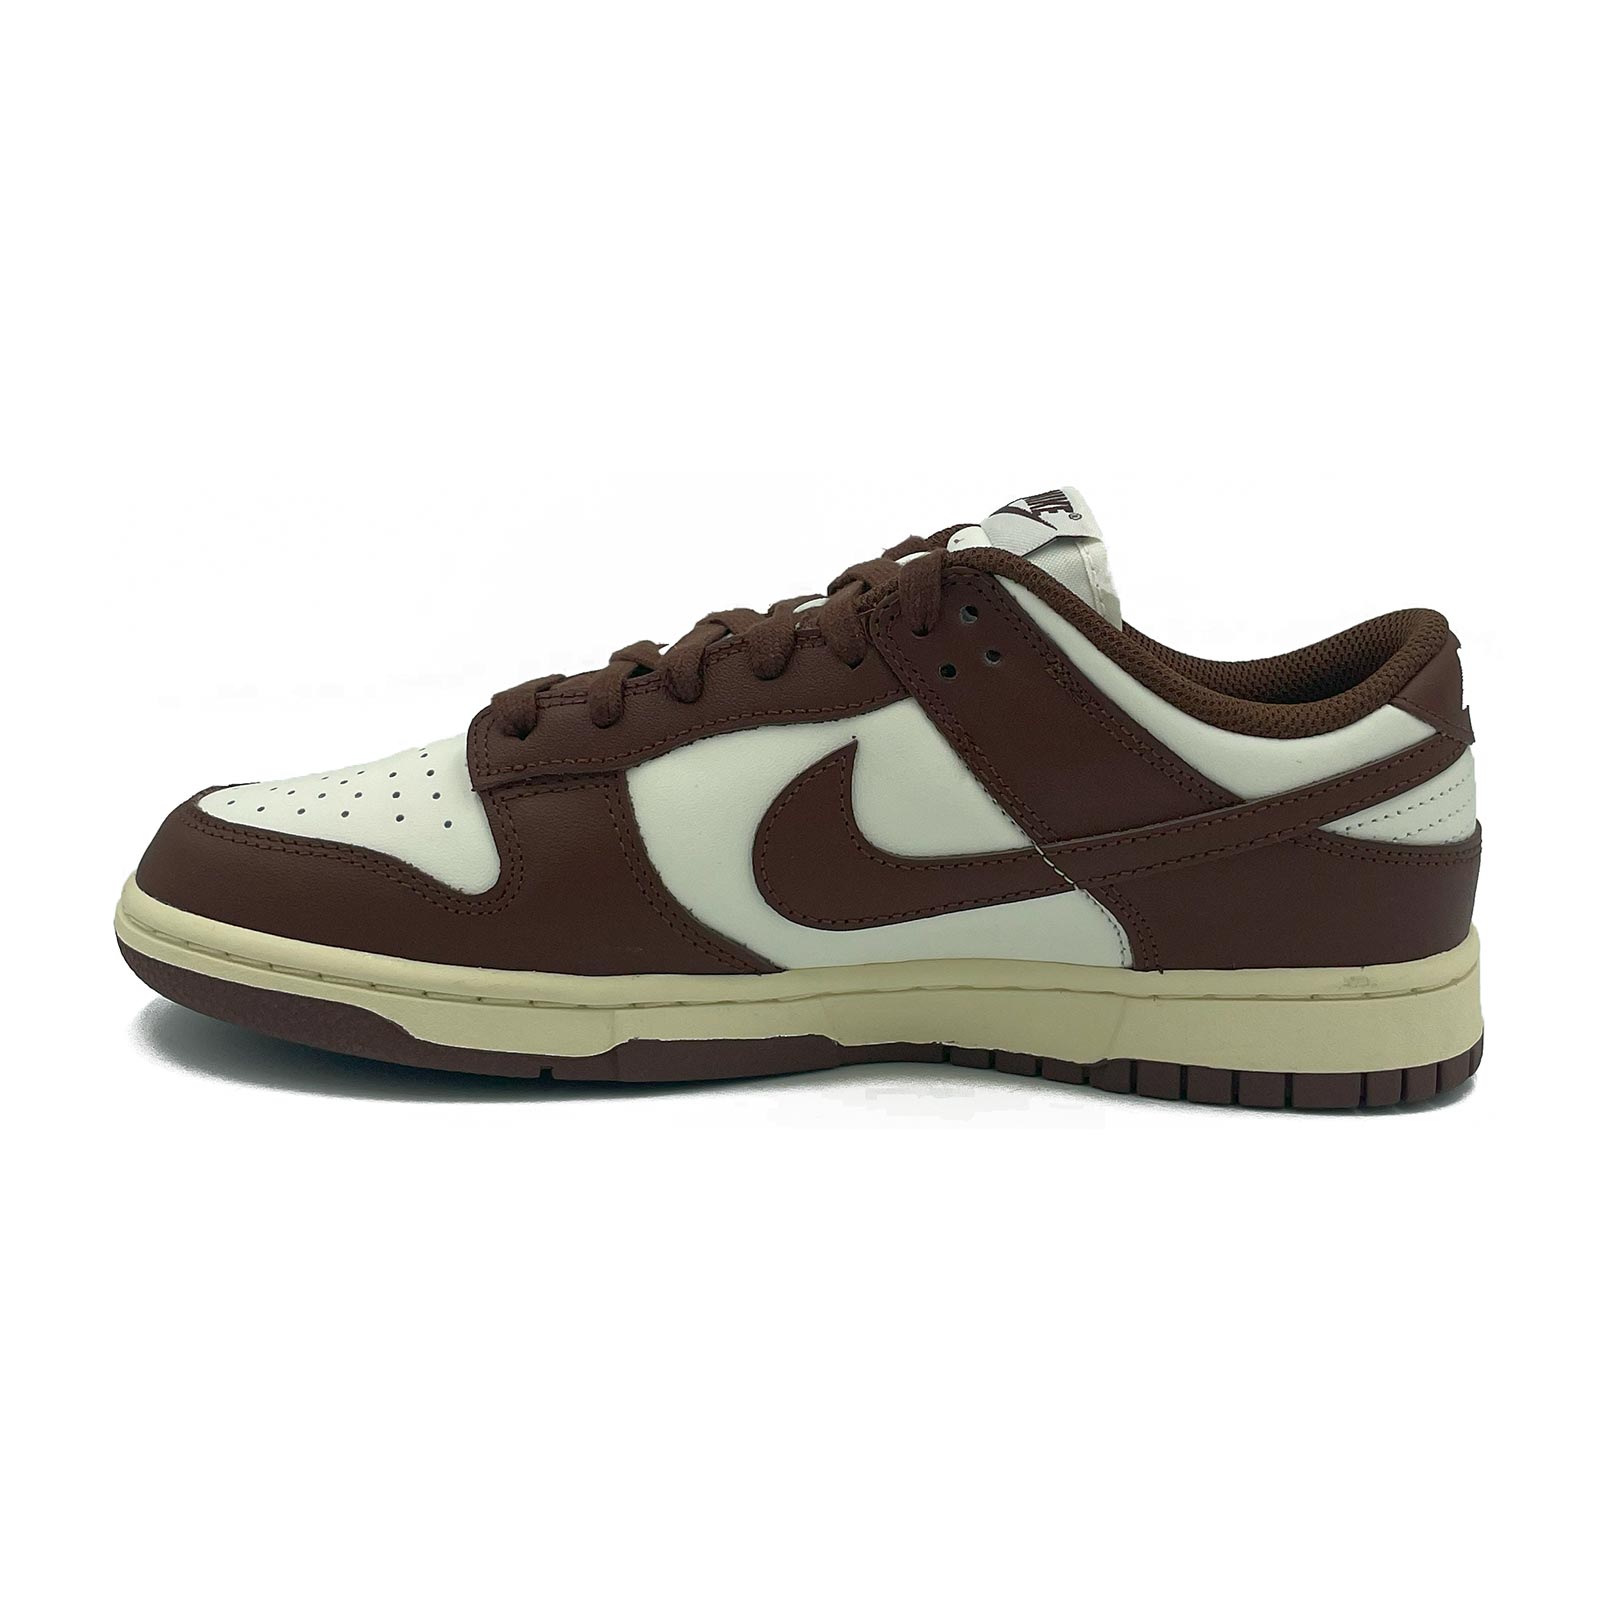 Women's nike poisons Dunk Low, Cacao Wow